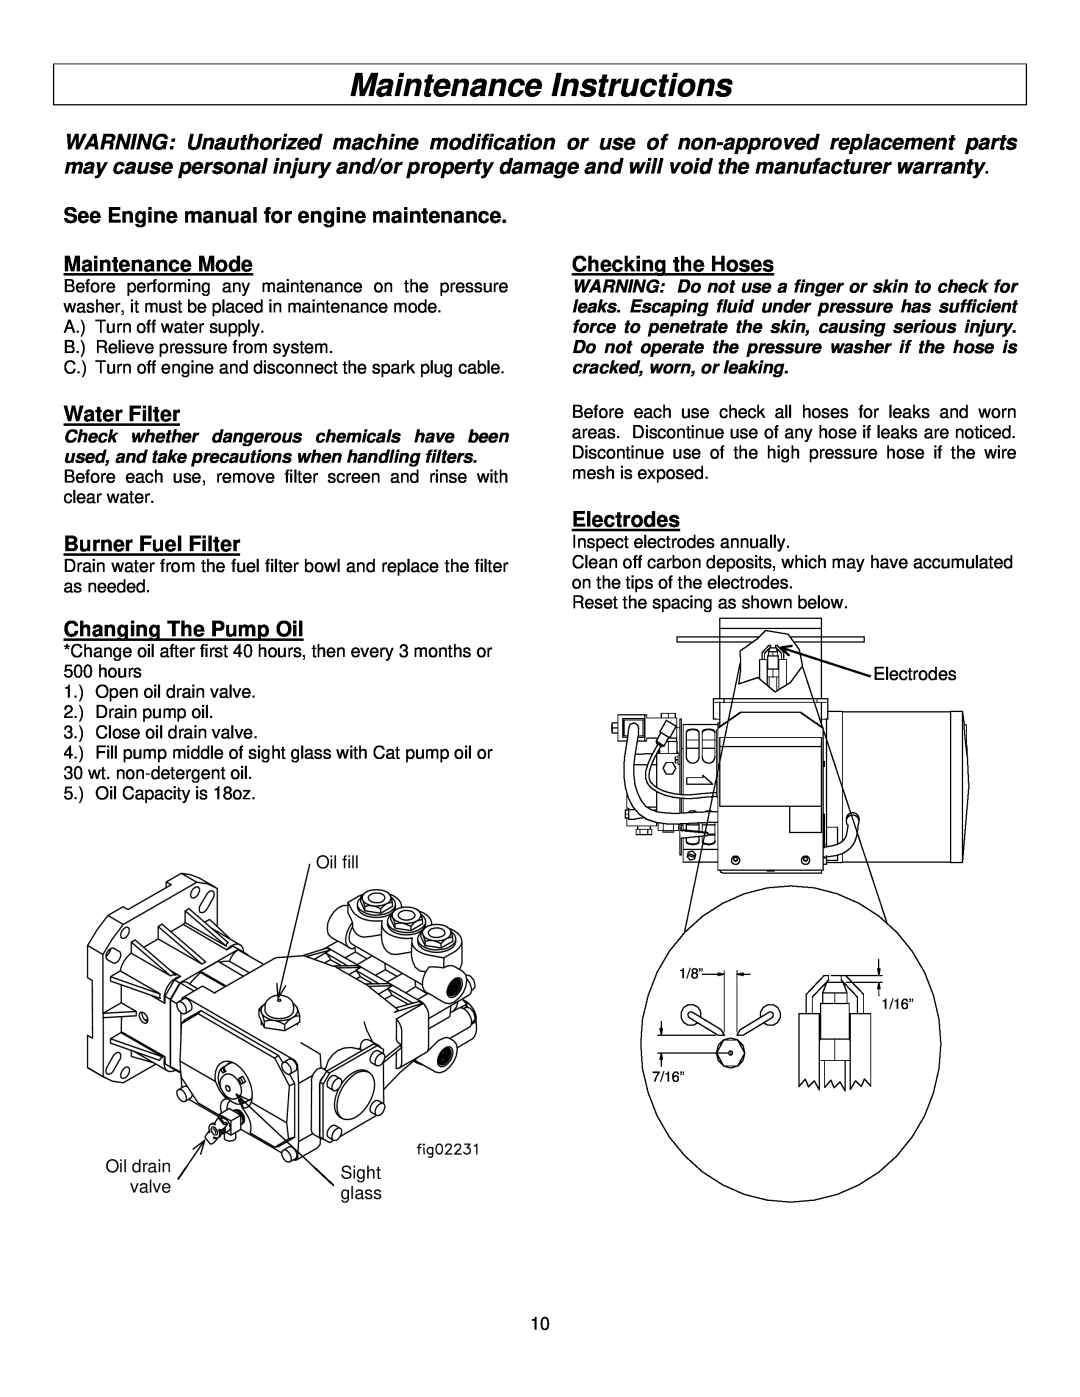 North Star M157594I Maintenance Instructions, See Engine manual for engine maintenance Maintenance Mode, Water Filter 